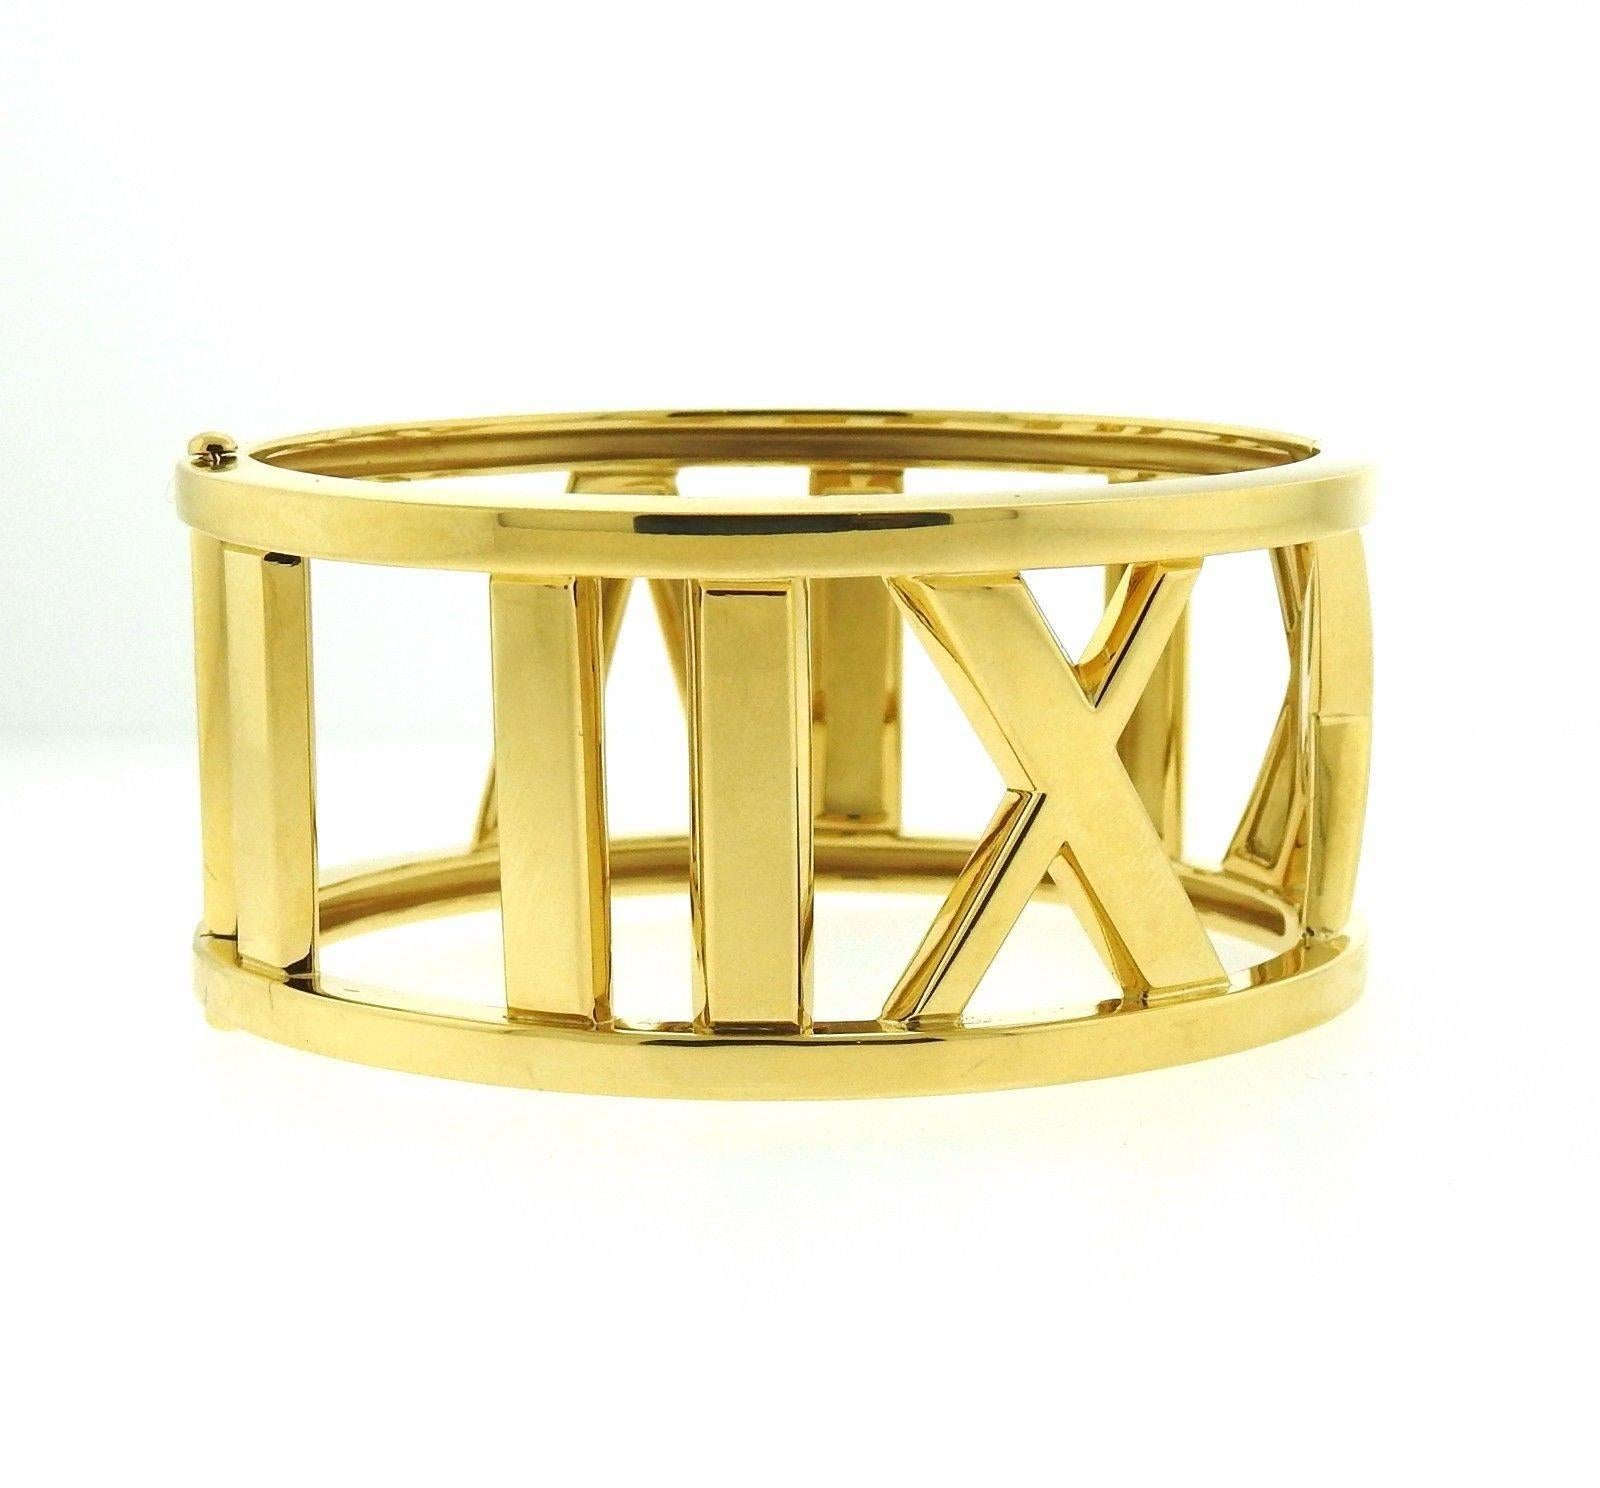 An 18k yellow gold bangle bracelet from the Atlas collection by Tiffany & Co.  The bangle will comfortably fit up to 6 3/4